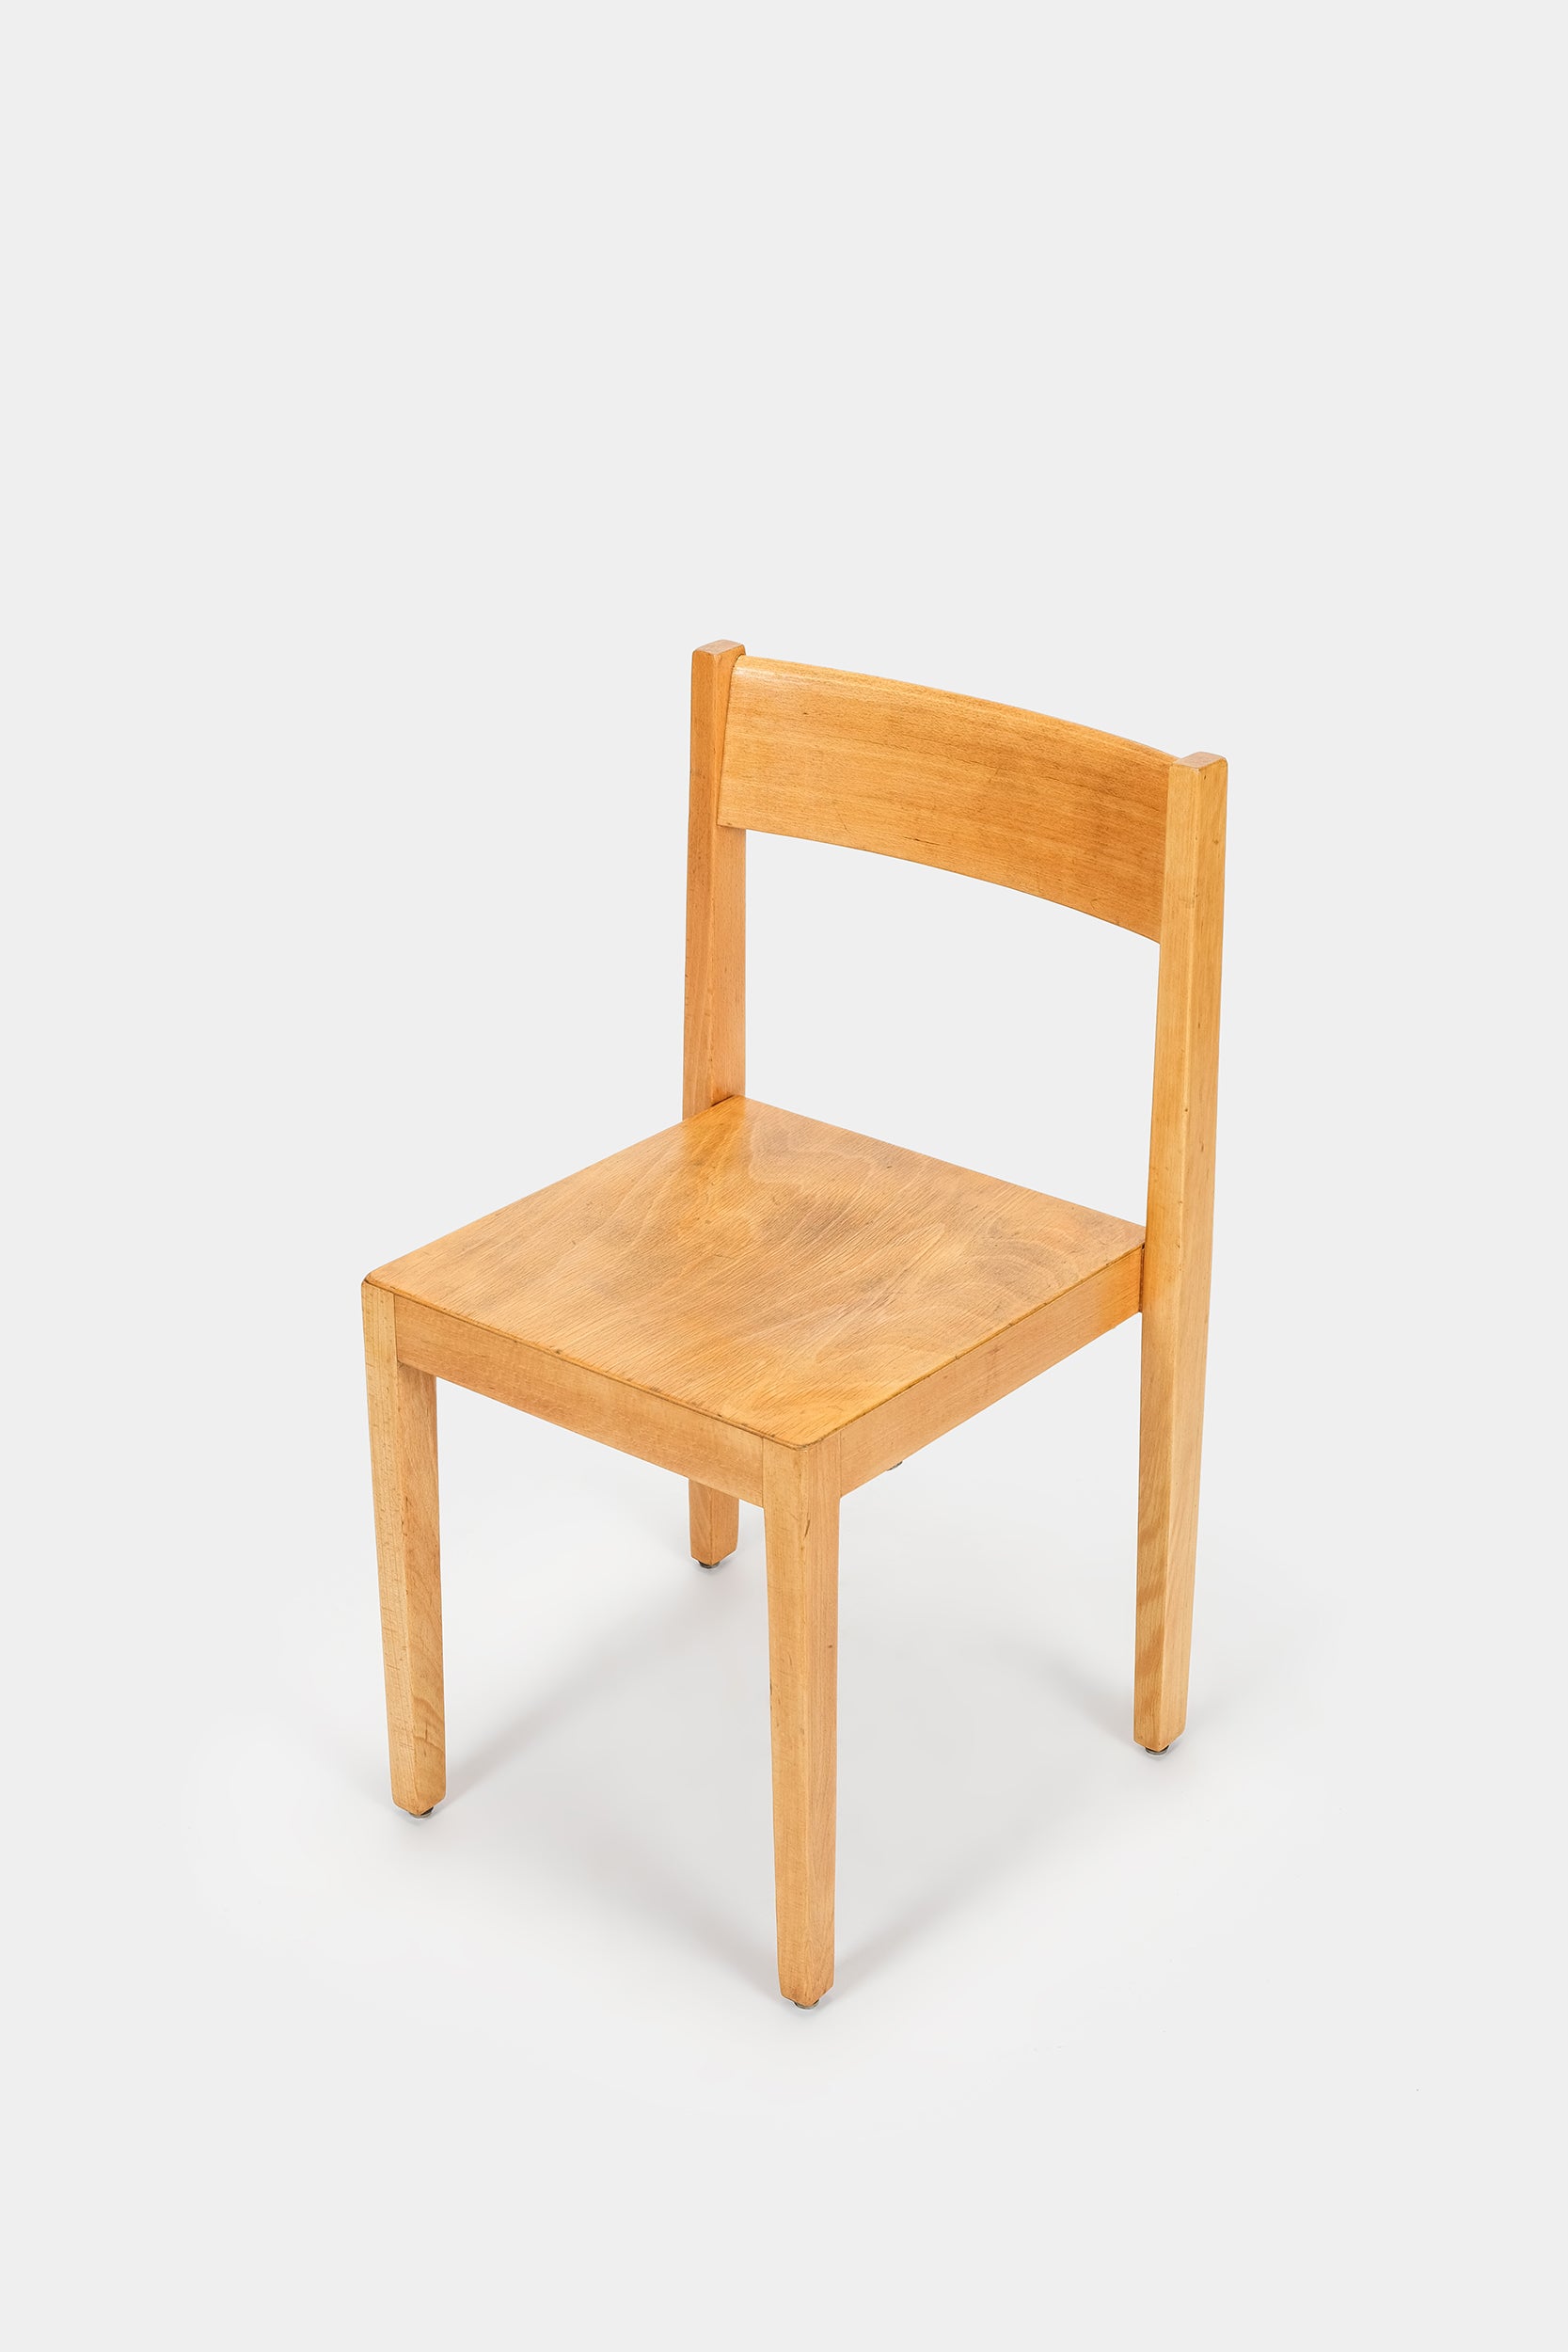 Carl Auböck, 4 Chairs, Stackable, 1956